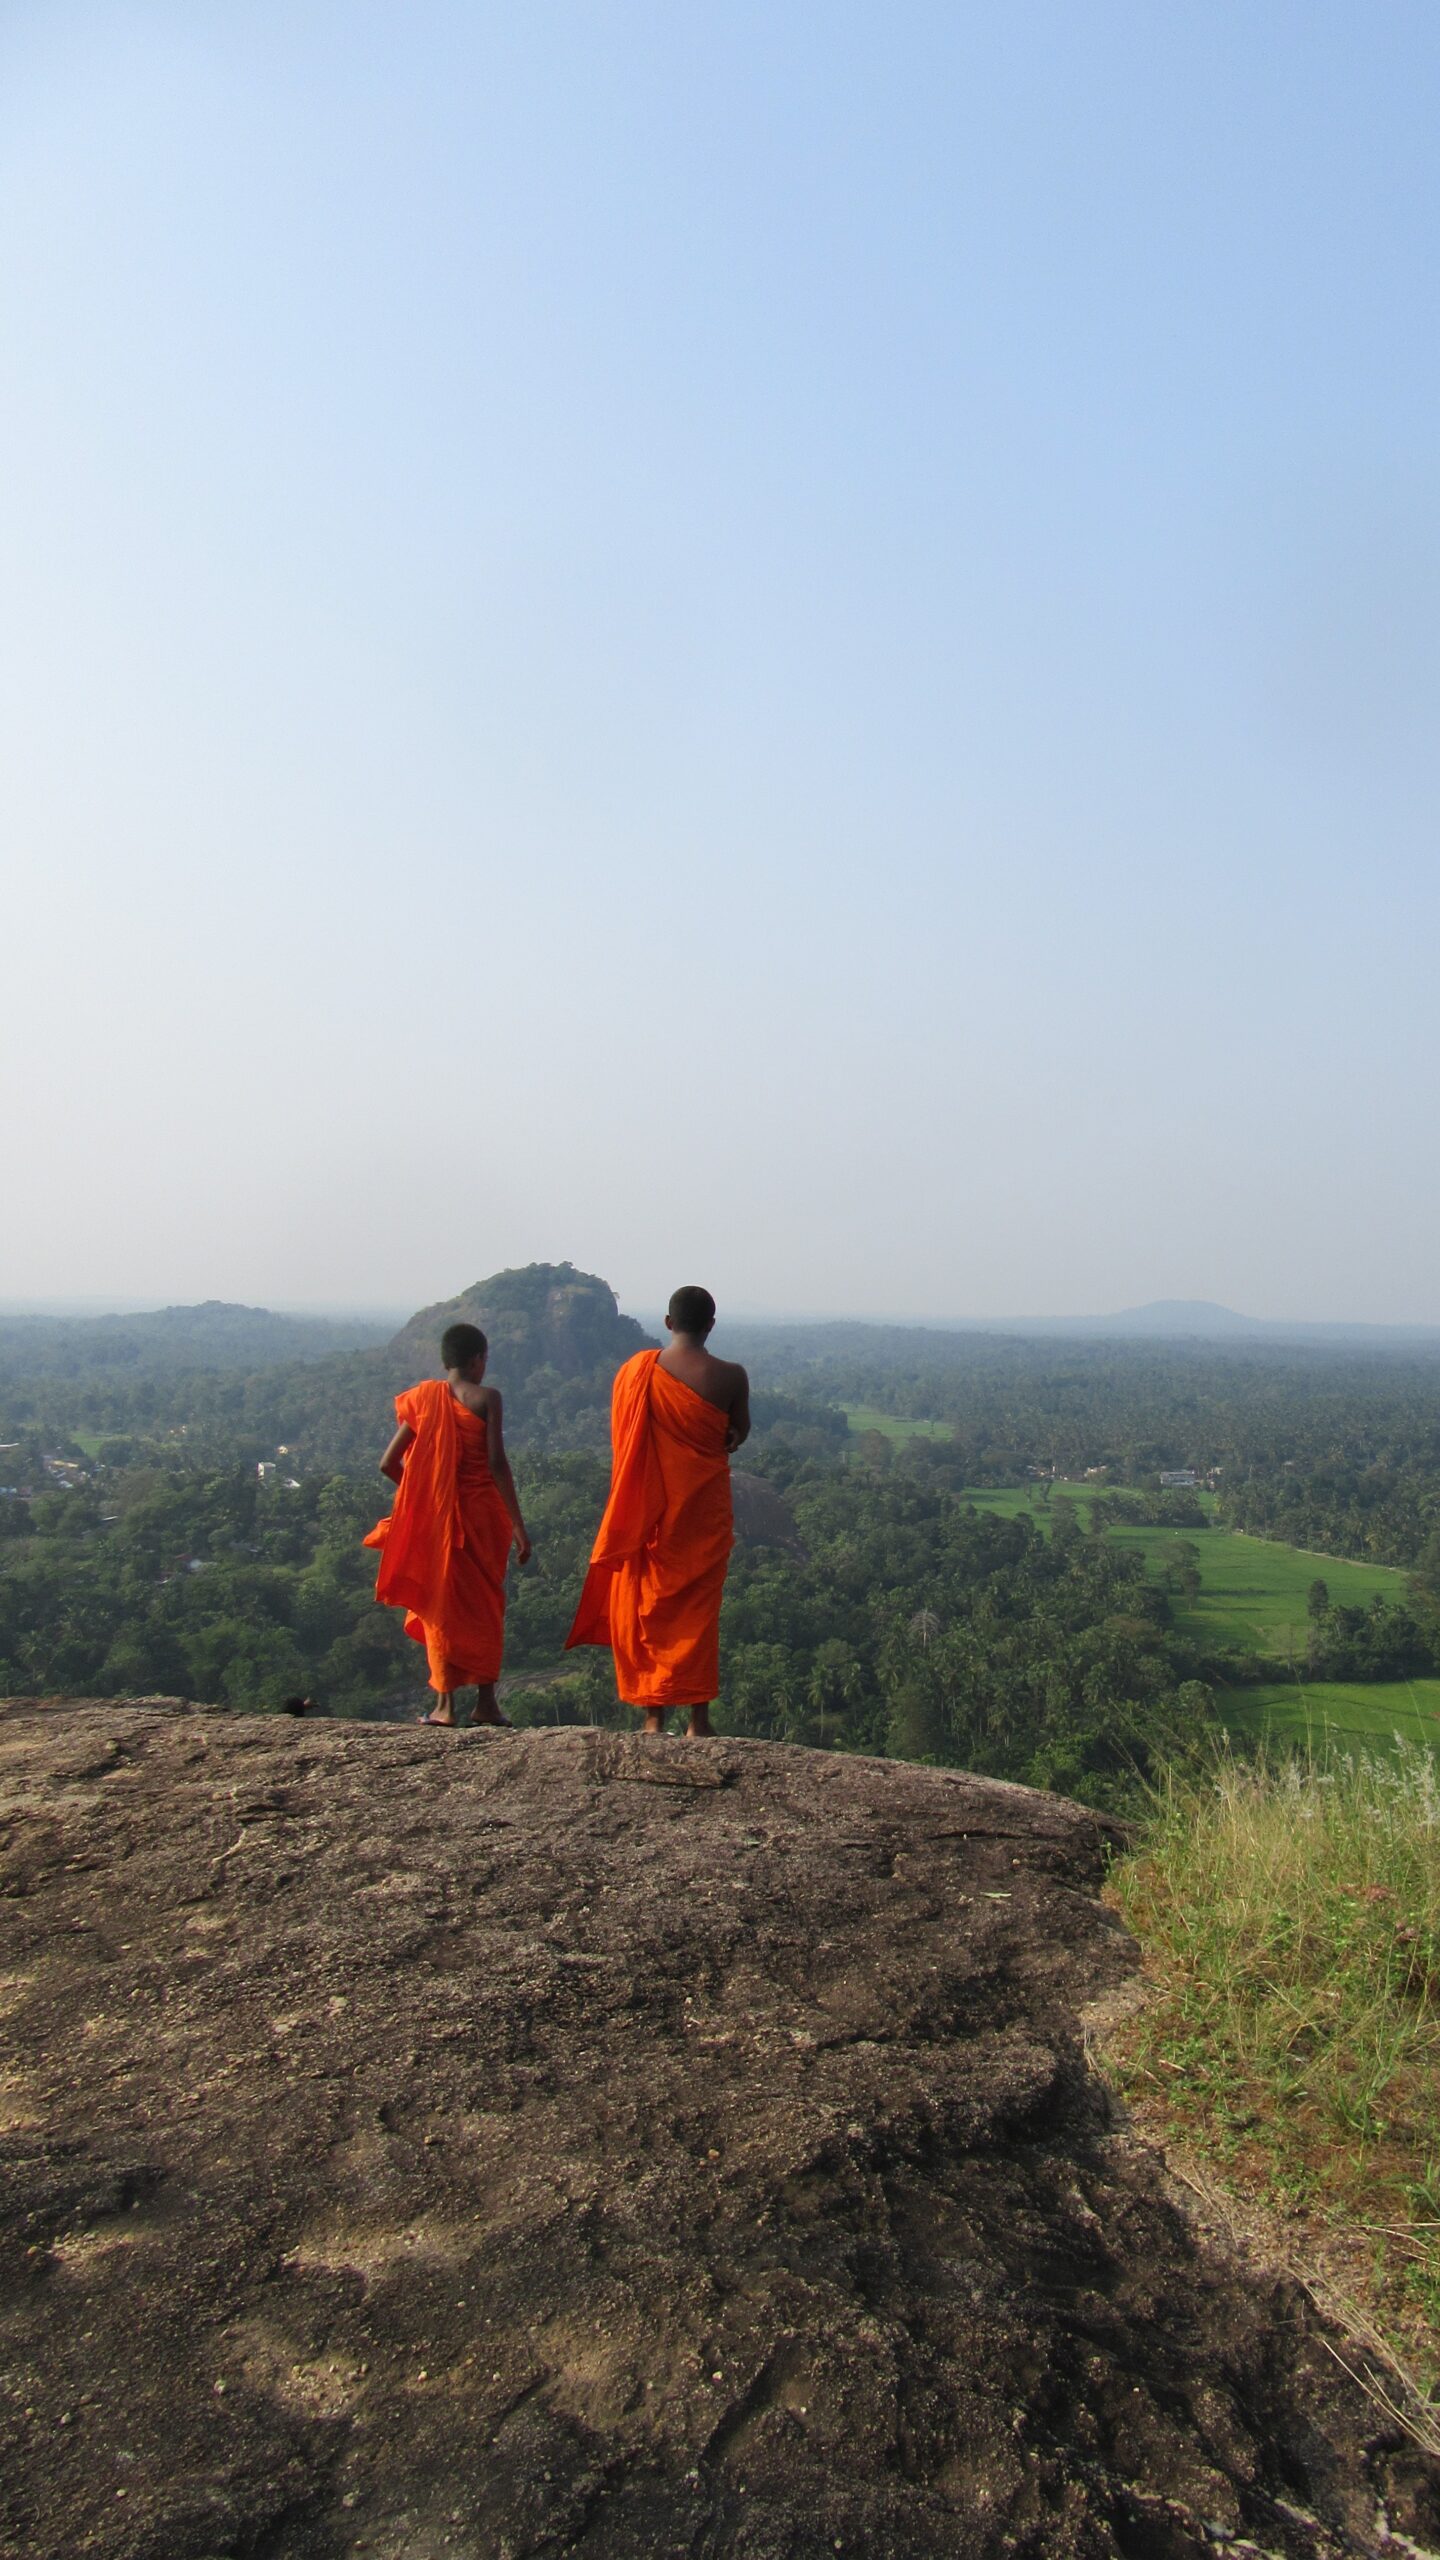 Two Monks, One Lesson: Letting Go